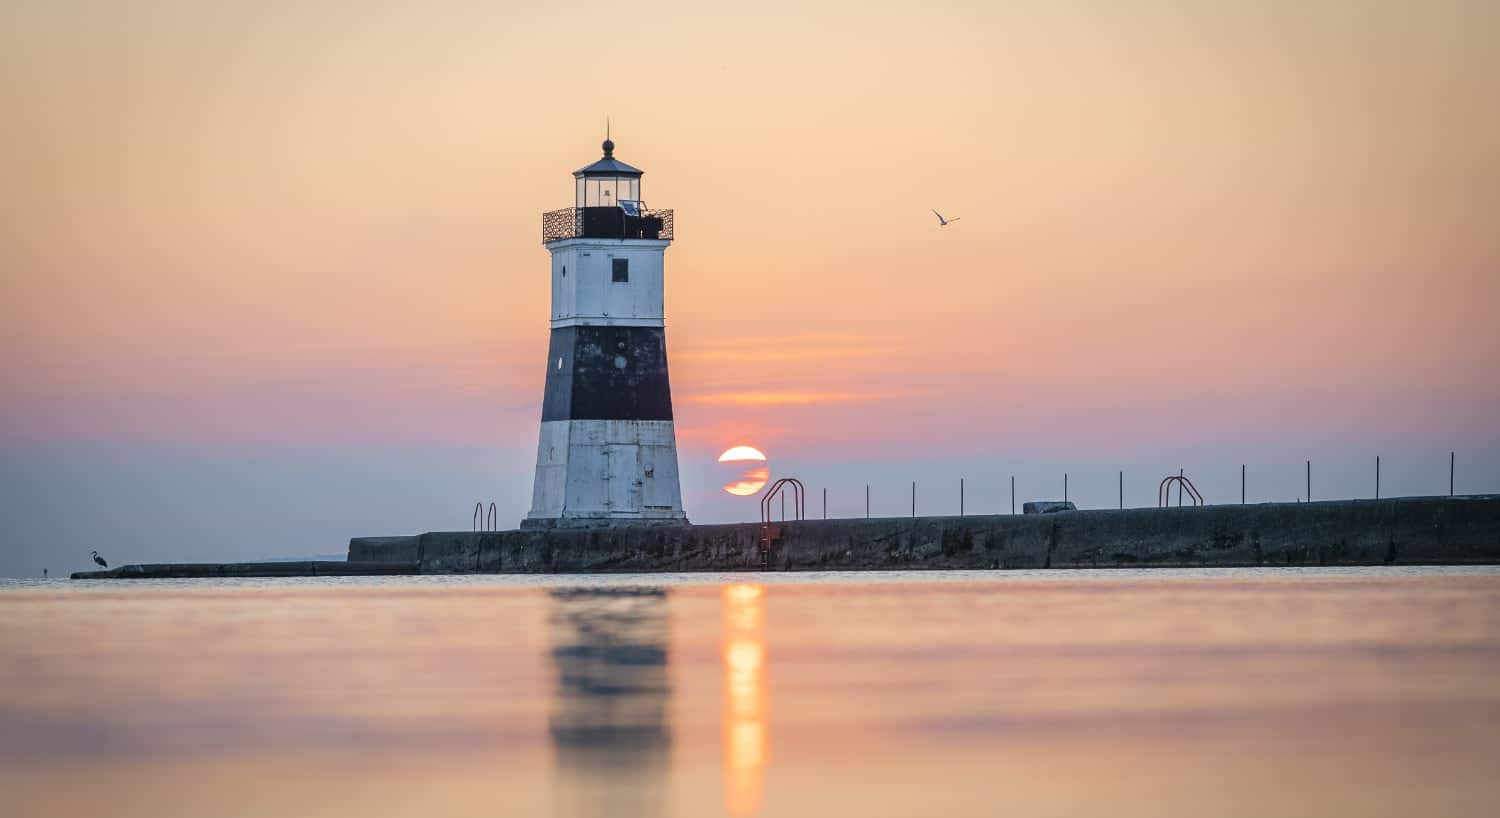 Lighthouse surrounded by calm water with a setting sun covered by clouds in the background